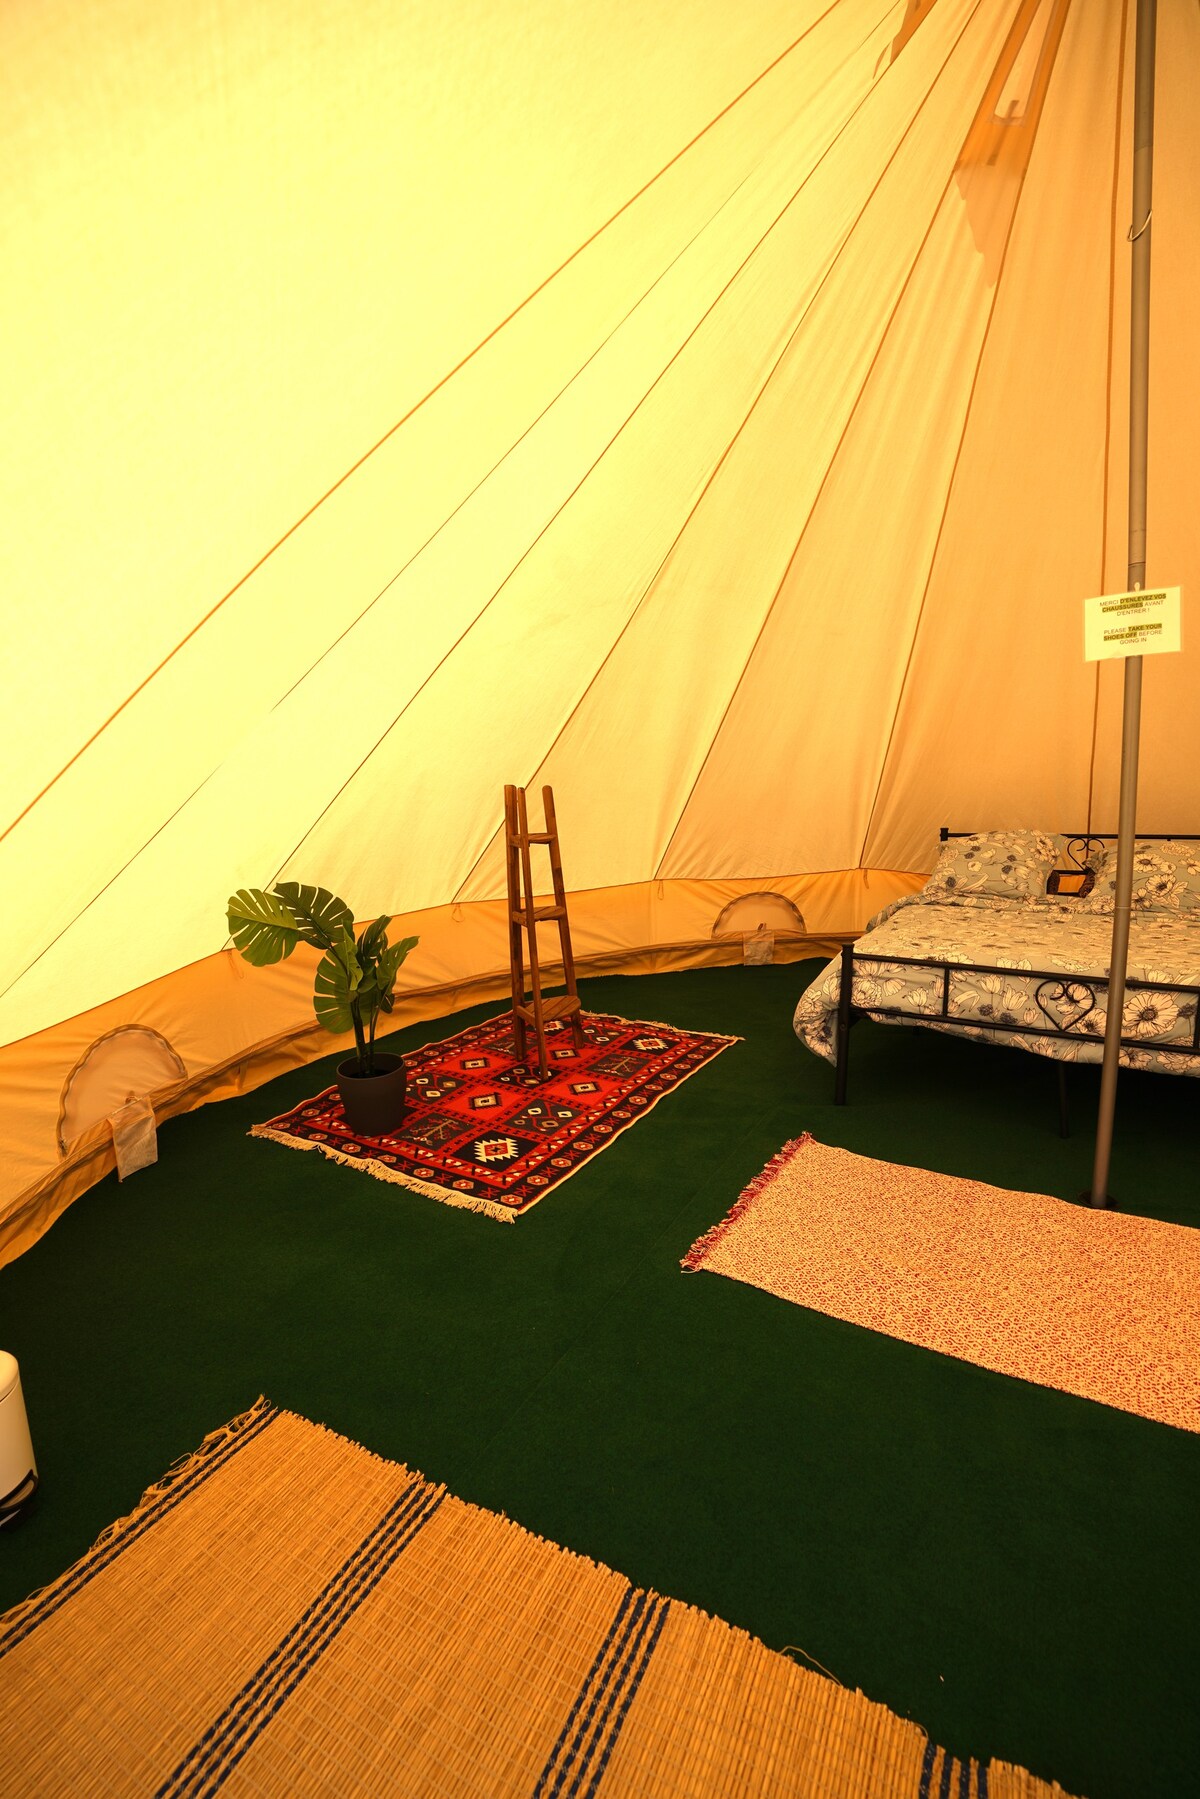 The Bell Tent Red - Camping Arbre de Vie